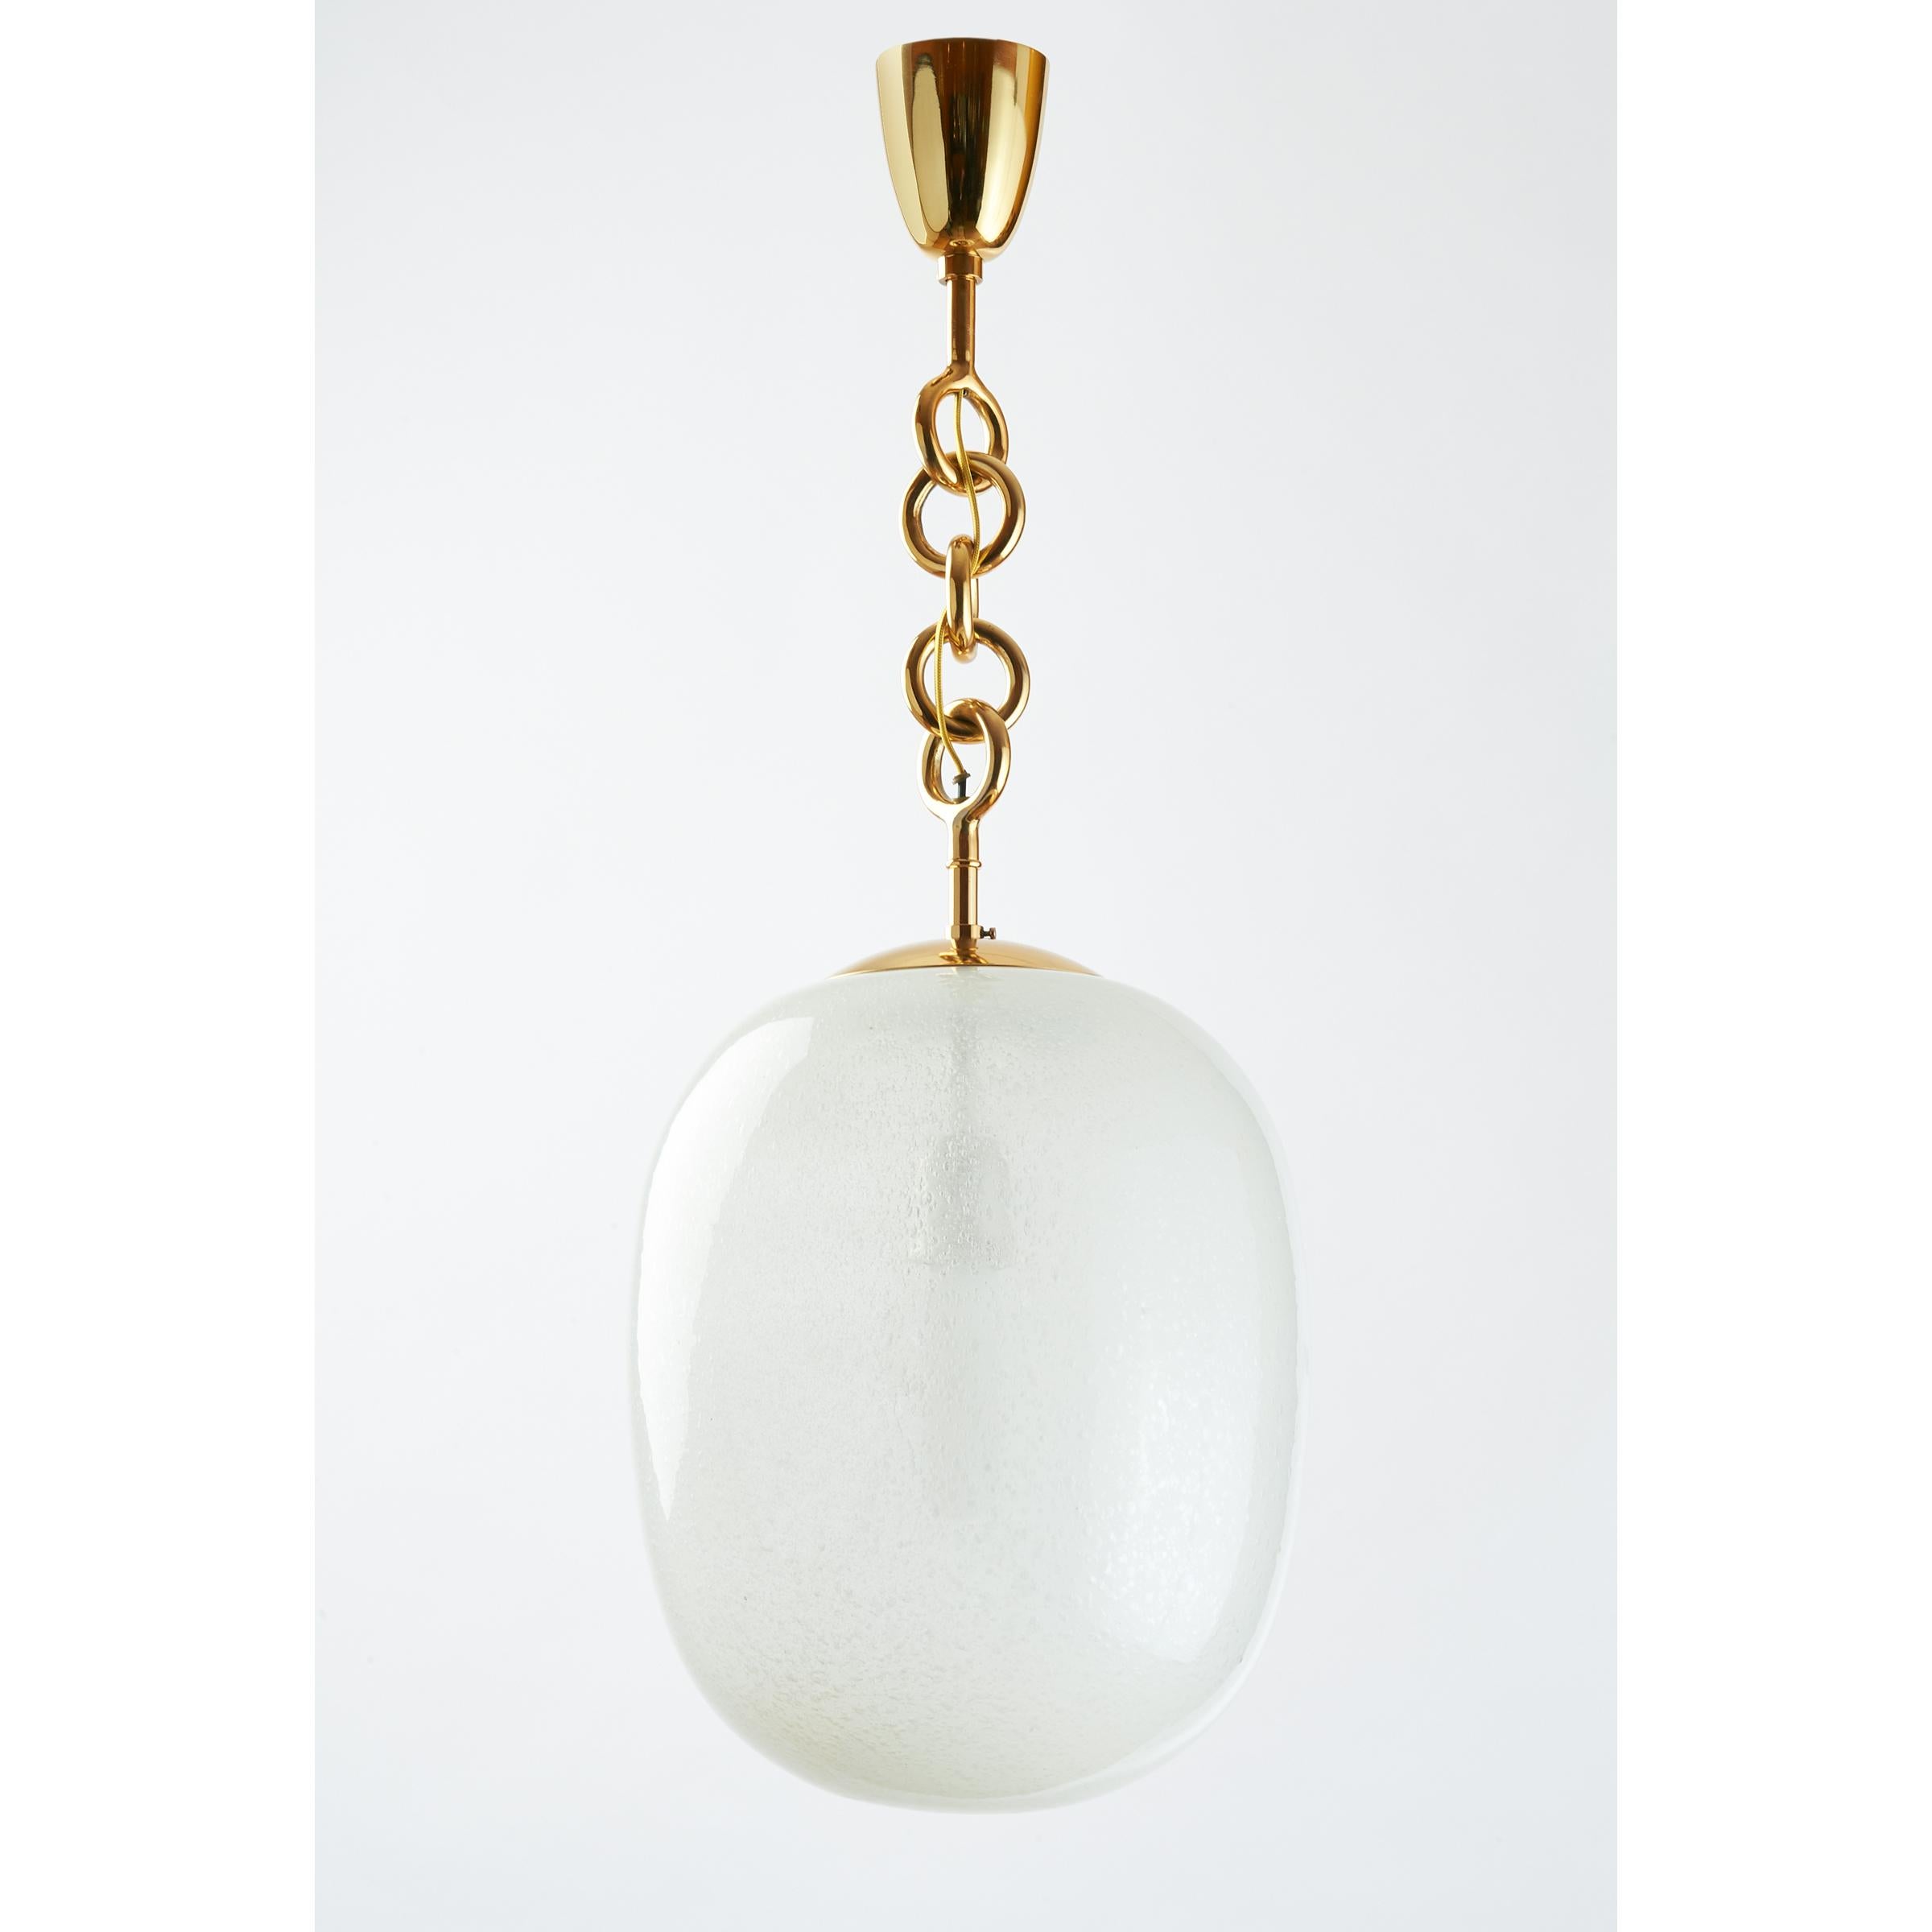 Seguso
Exquisite oval lantern or pendant in blown Pulegoso glass 
Polished brass mounts with handsome circular link chain suspension, Italy, circa 1950
12 diameter x 30 height
Rewired for use in the US with one standard base bulb.
 